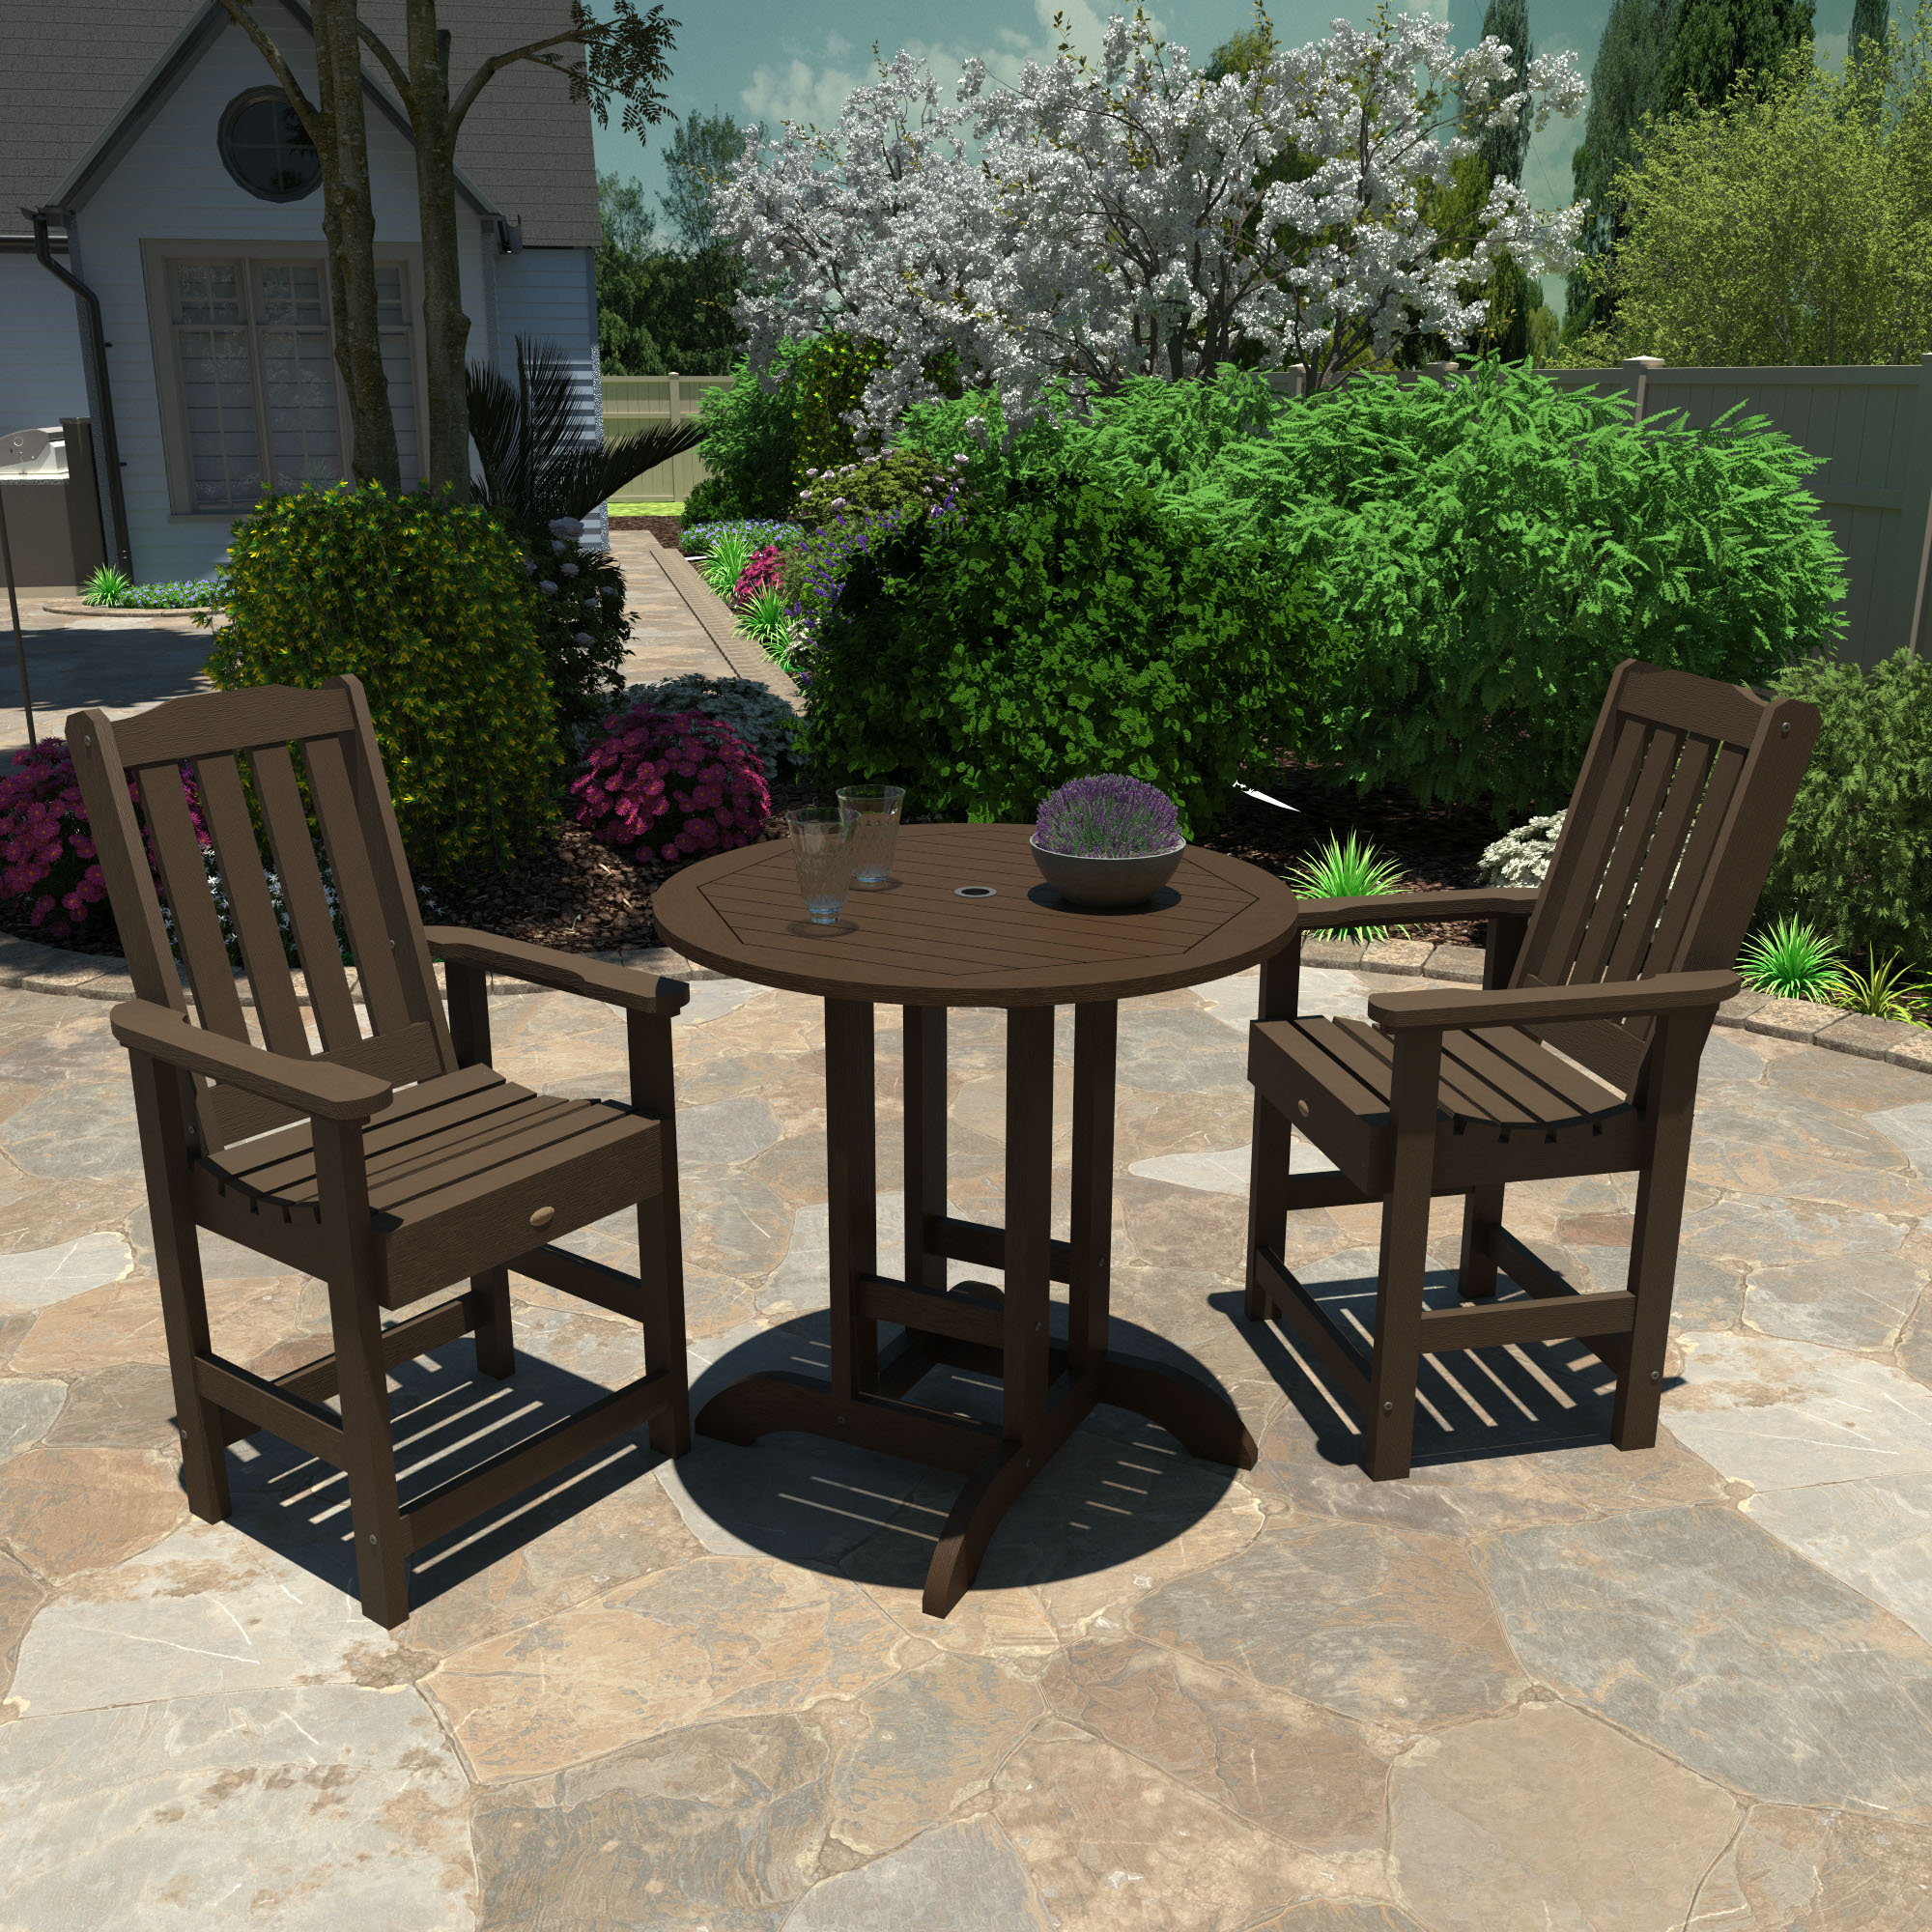 Highwood 3pc Lehigh Round Dining Set - Counter Height - image 2 of 7